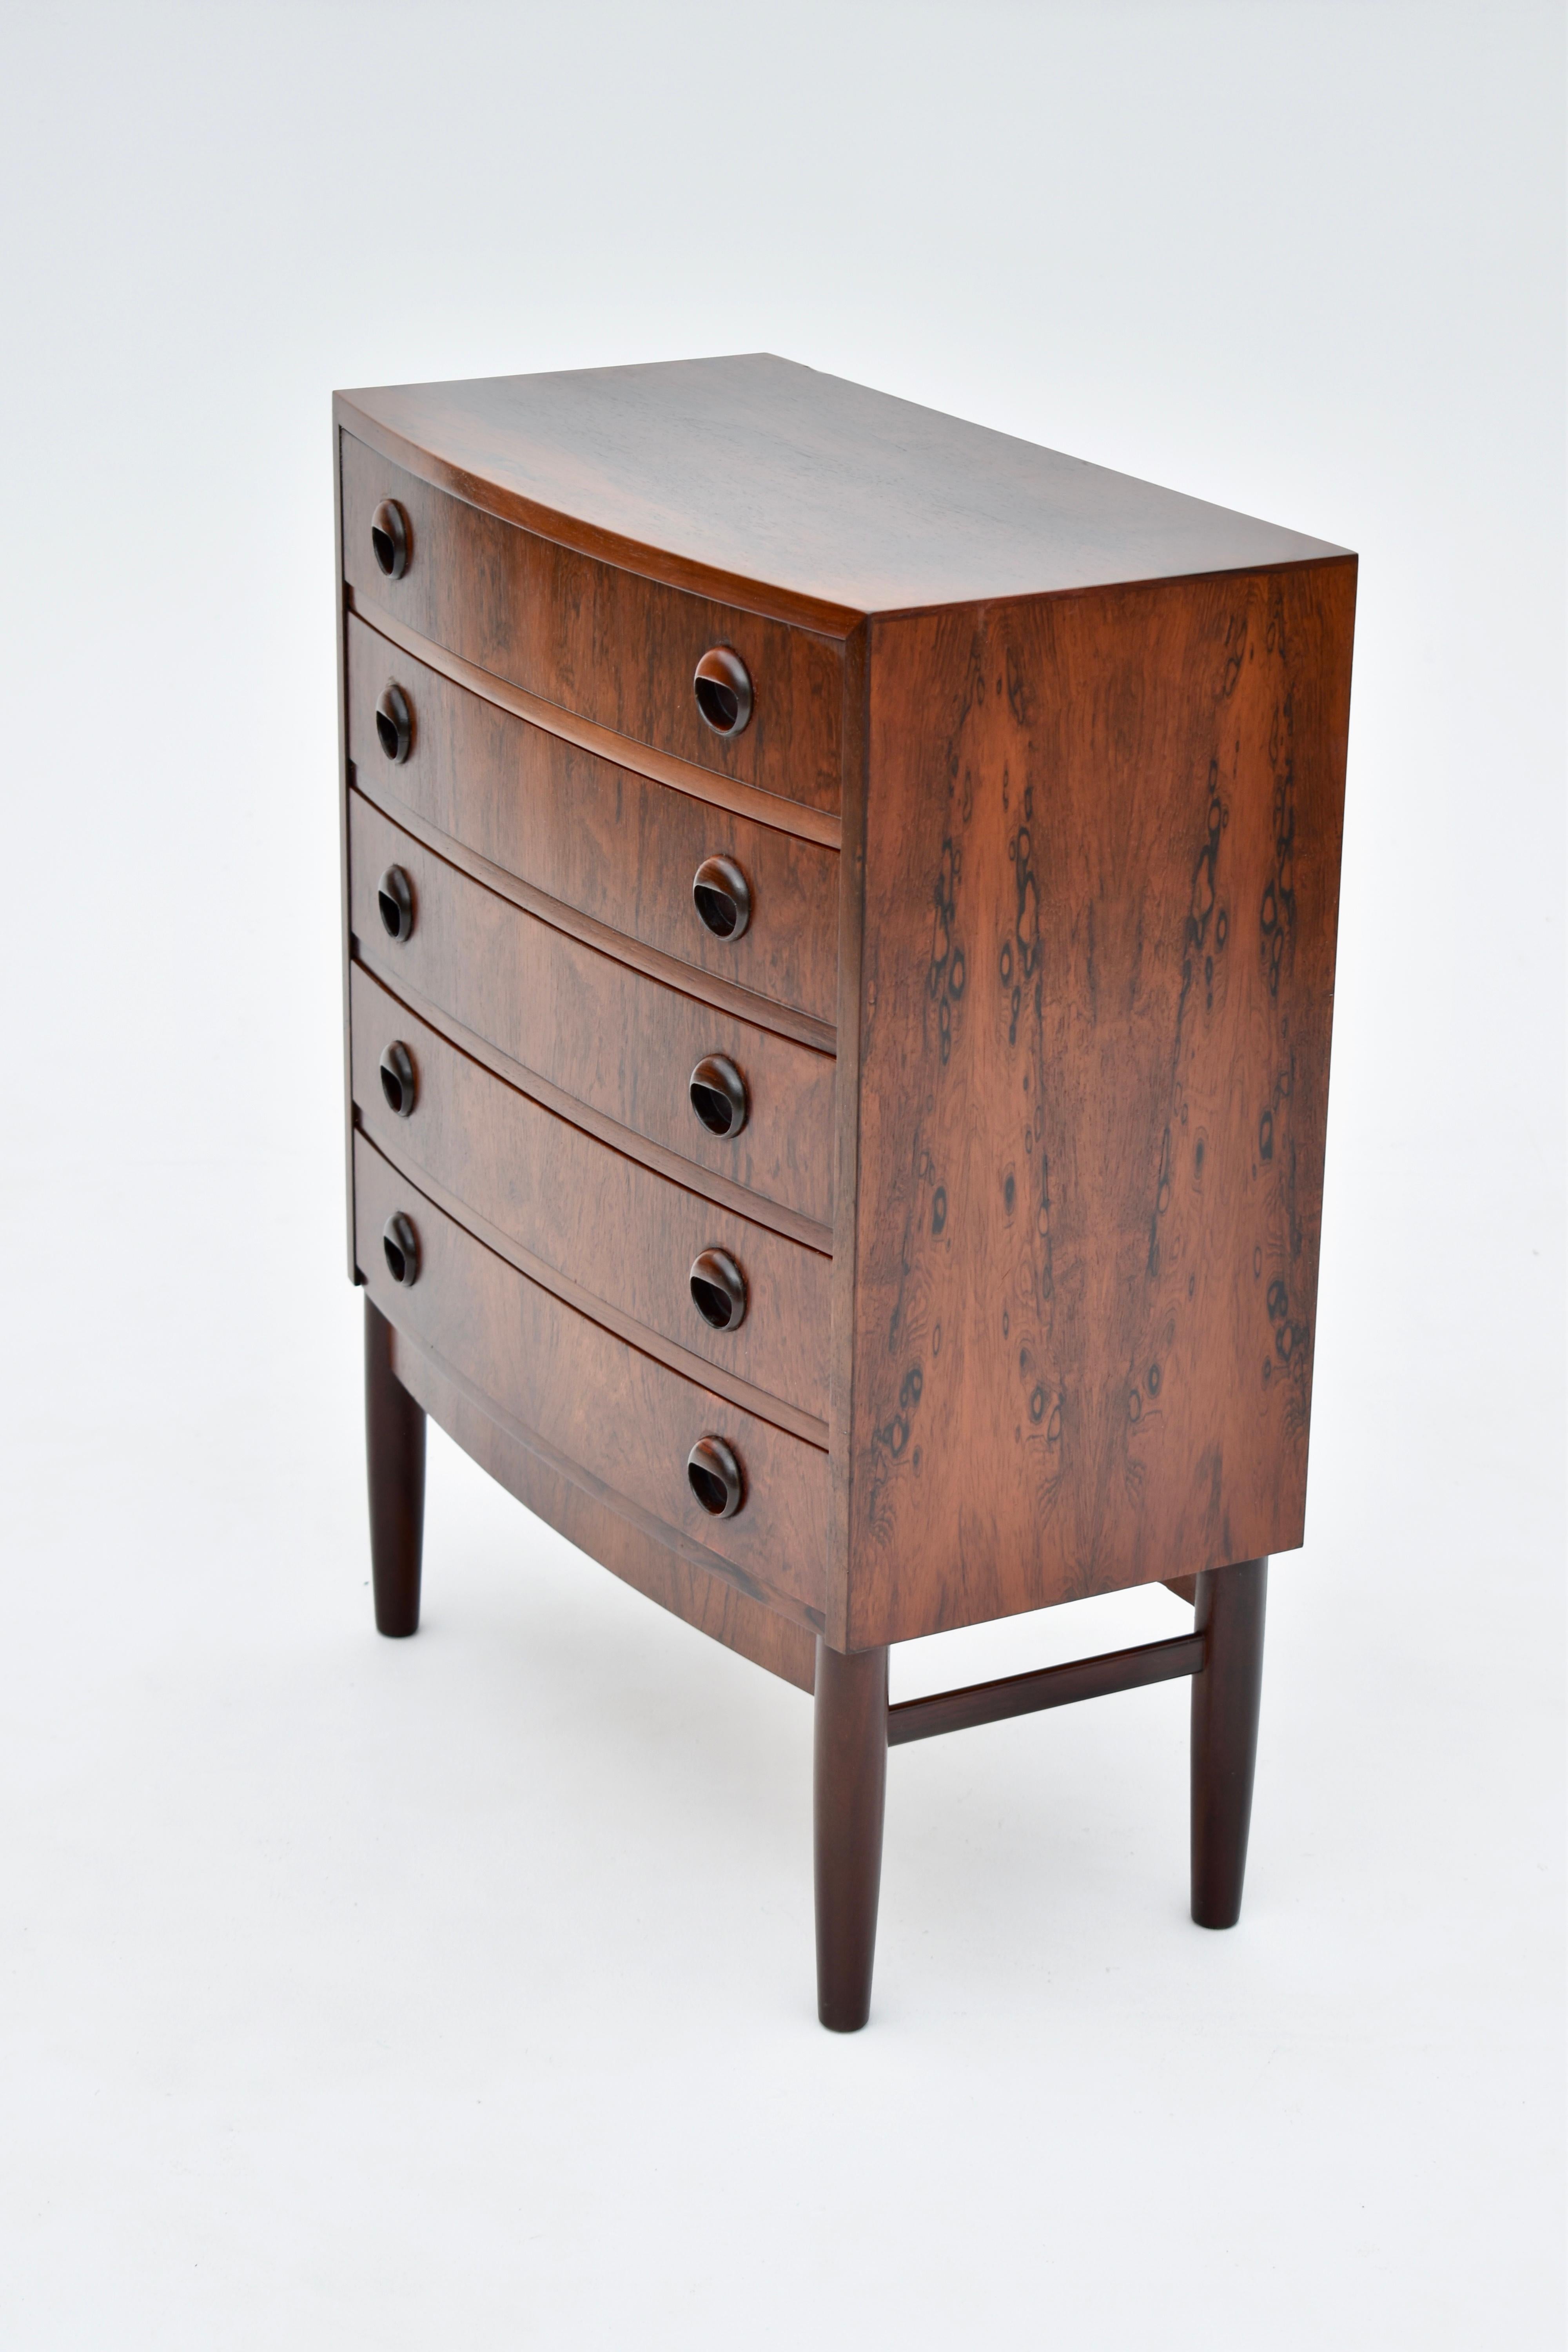 Kai Kristiansen Bow Fronted Chest of Drawers 8